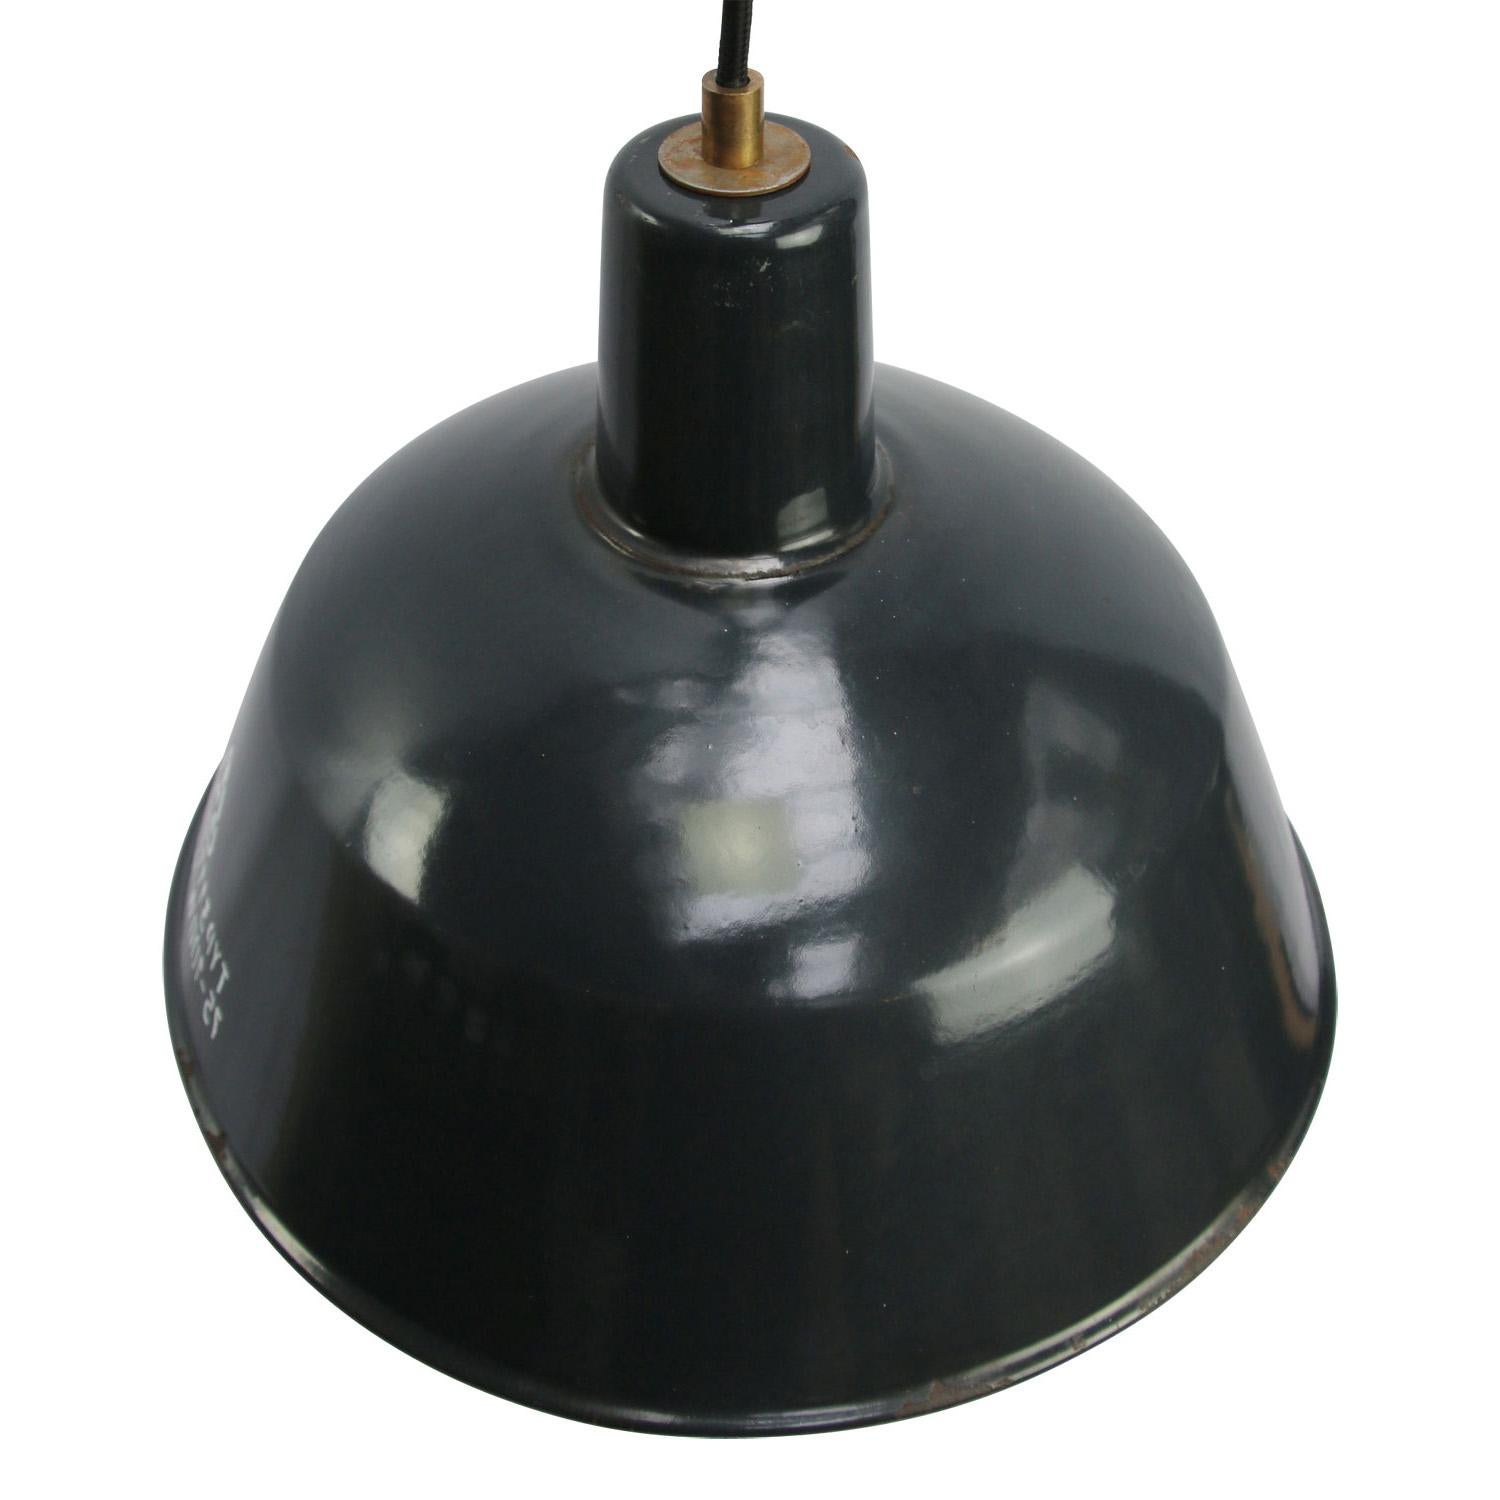 Factory hanging light
blue enamel, black type, white interior

Weight: 1.20 kg / 2.6 lb

Priced per individual item. All lamps have been made suitable by international standards for incandescent light bulbs, energy-efficient and LED bulbs.